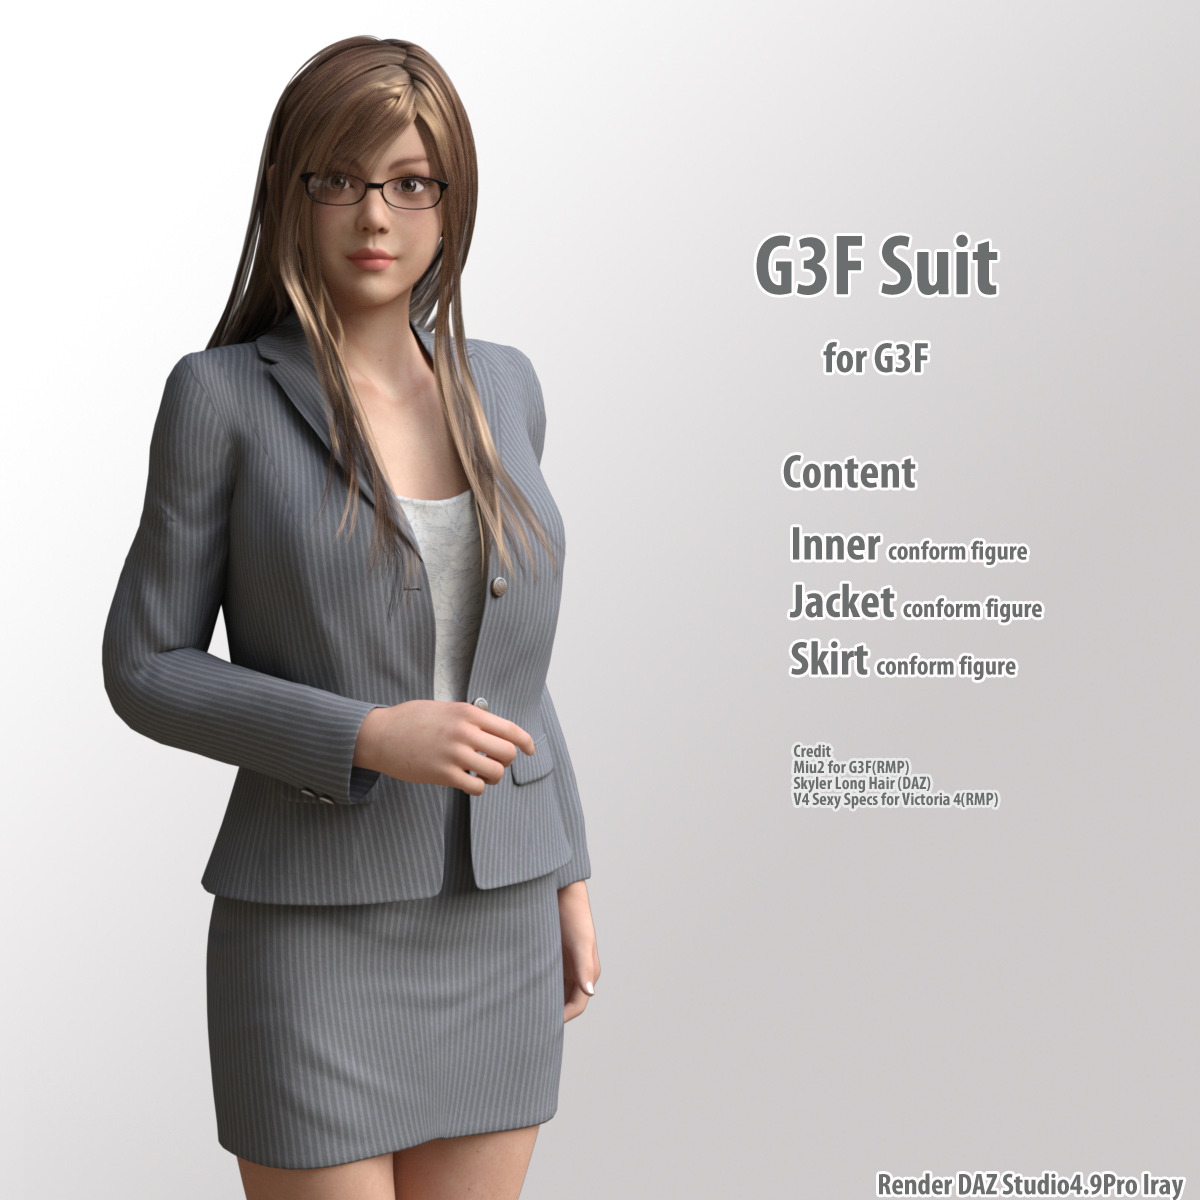 G3F Suit for G3F